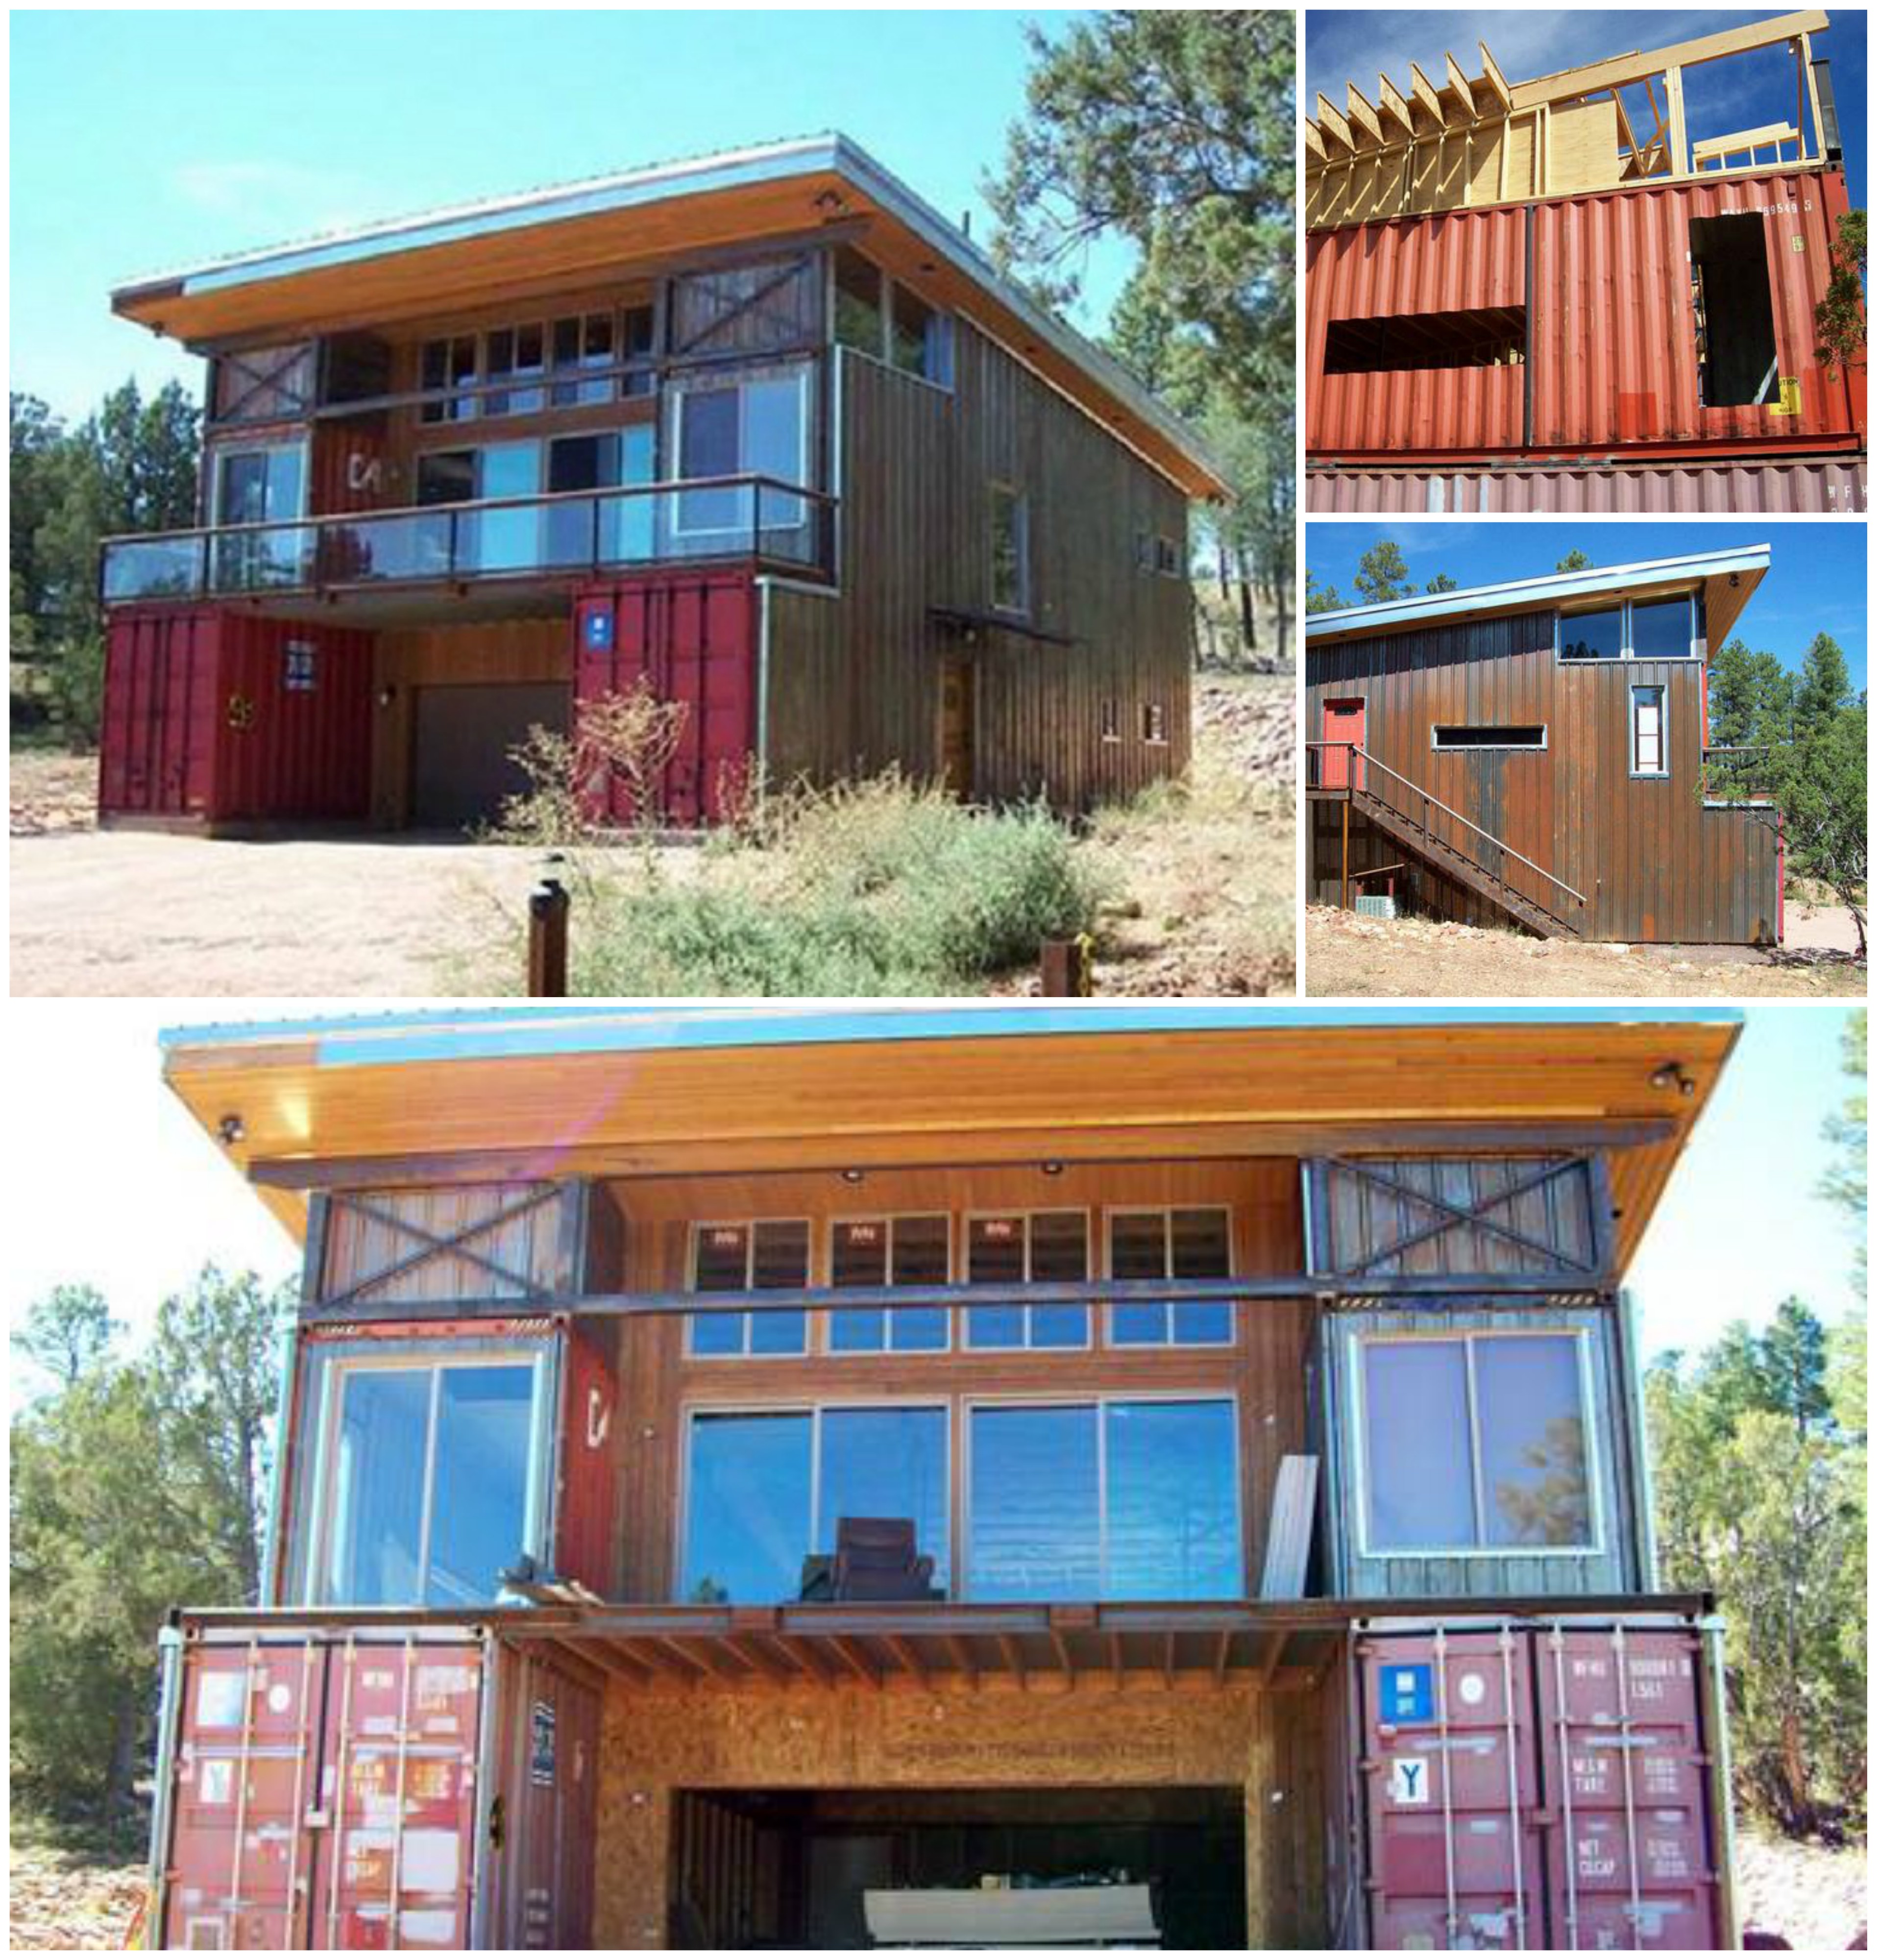 Hybrid Construction Method Home with Shipping Containers